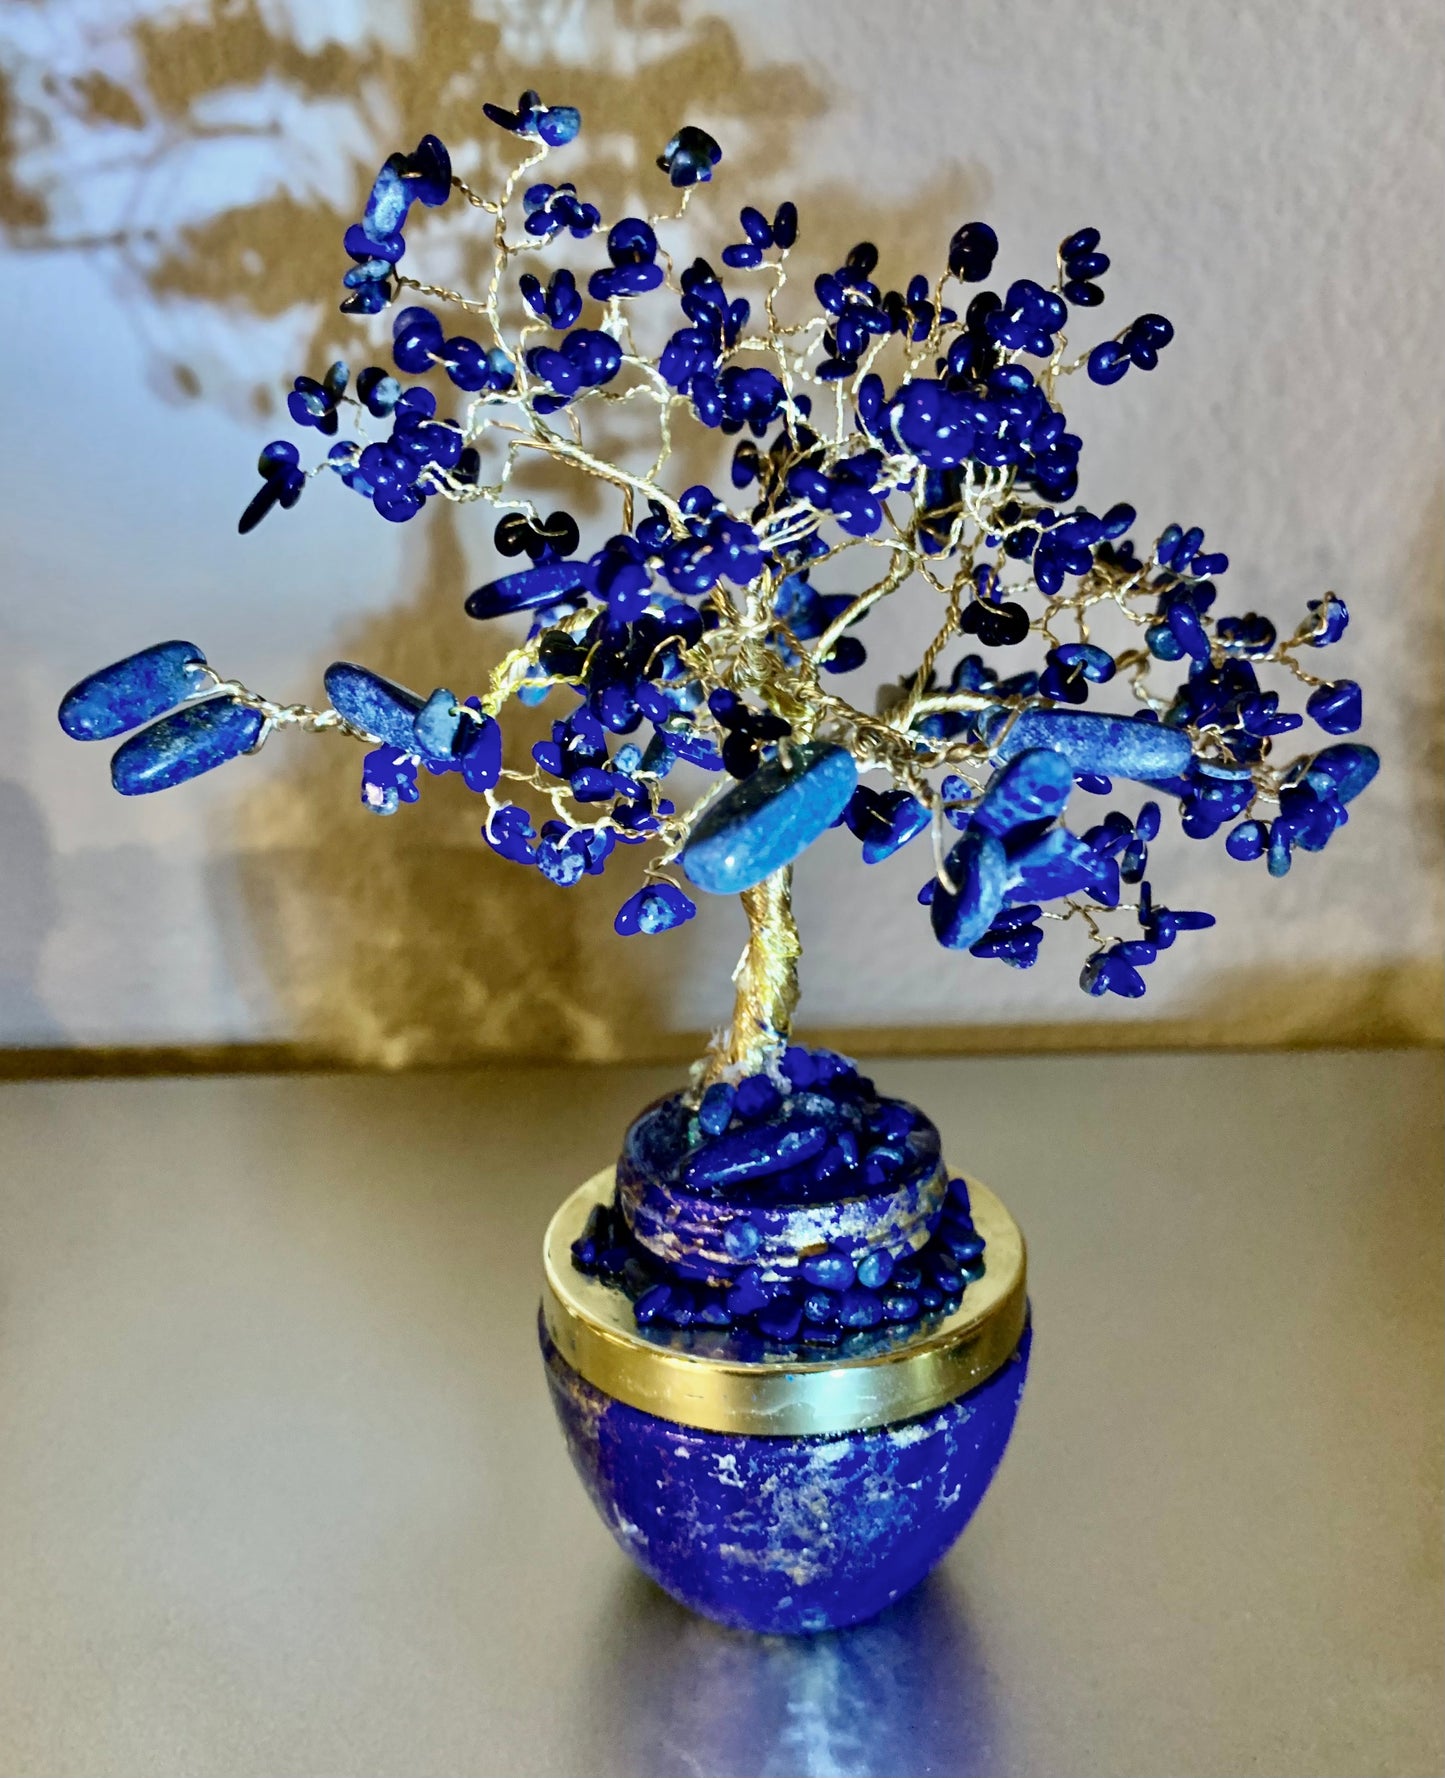 Handmade Lapis Lazuli and Sodalite 8" Gemstone Tree Sculpture in a Painted Glass Pot by Sharmaine Rayner